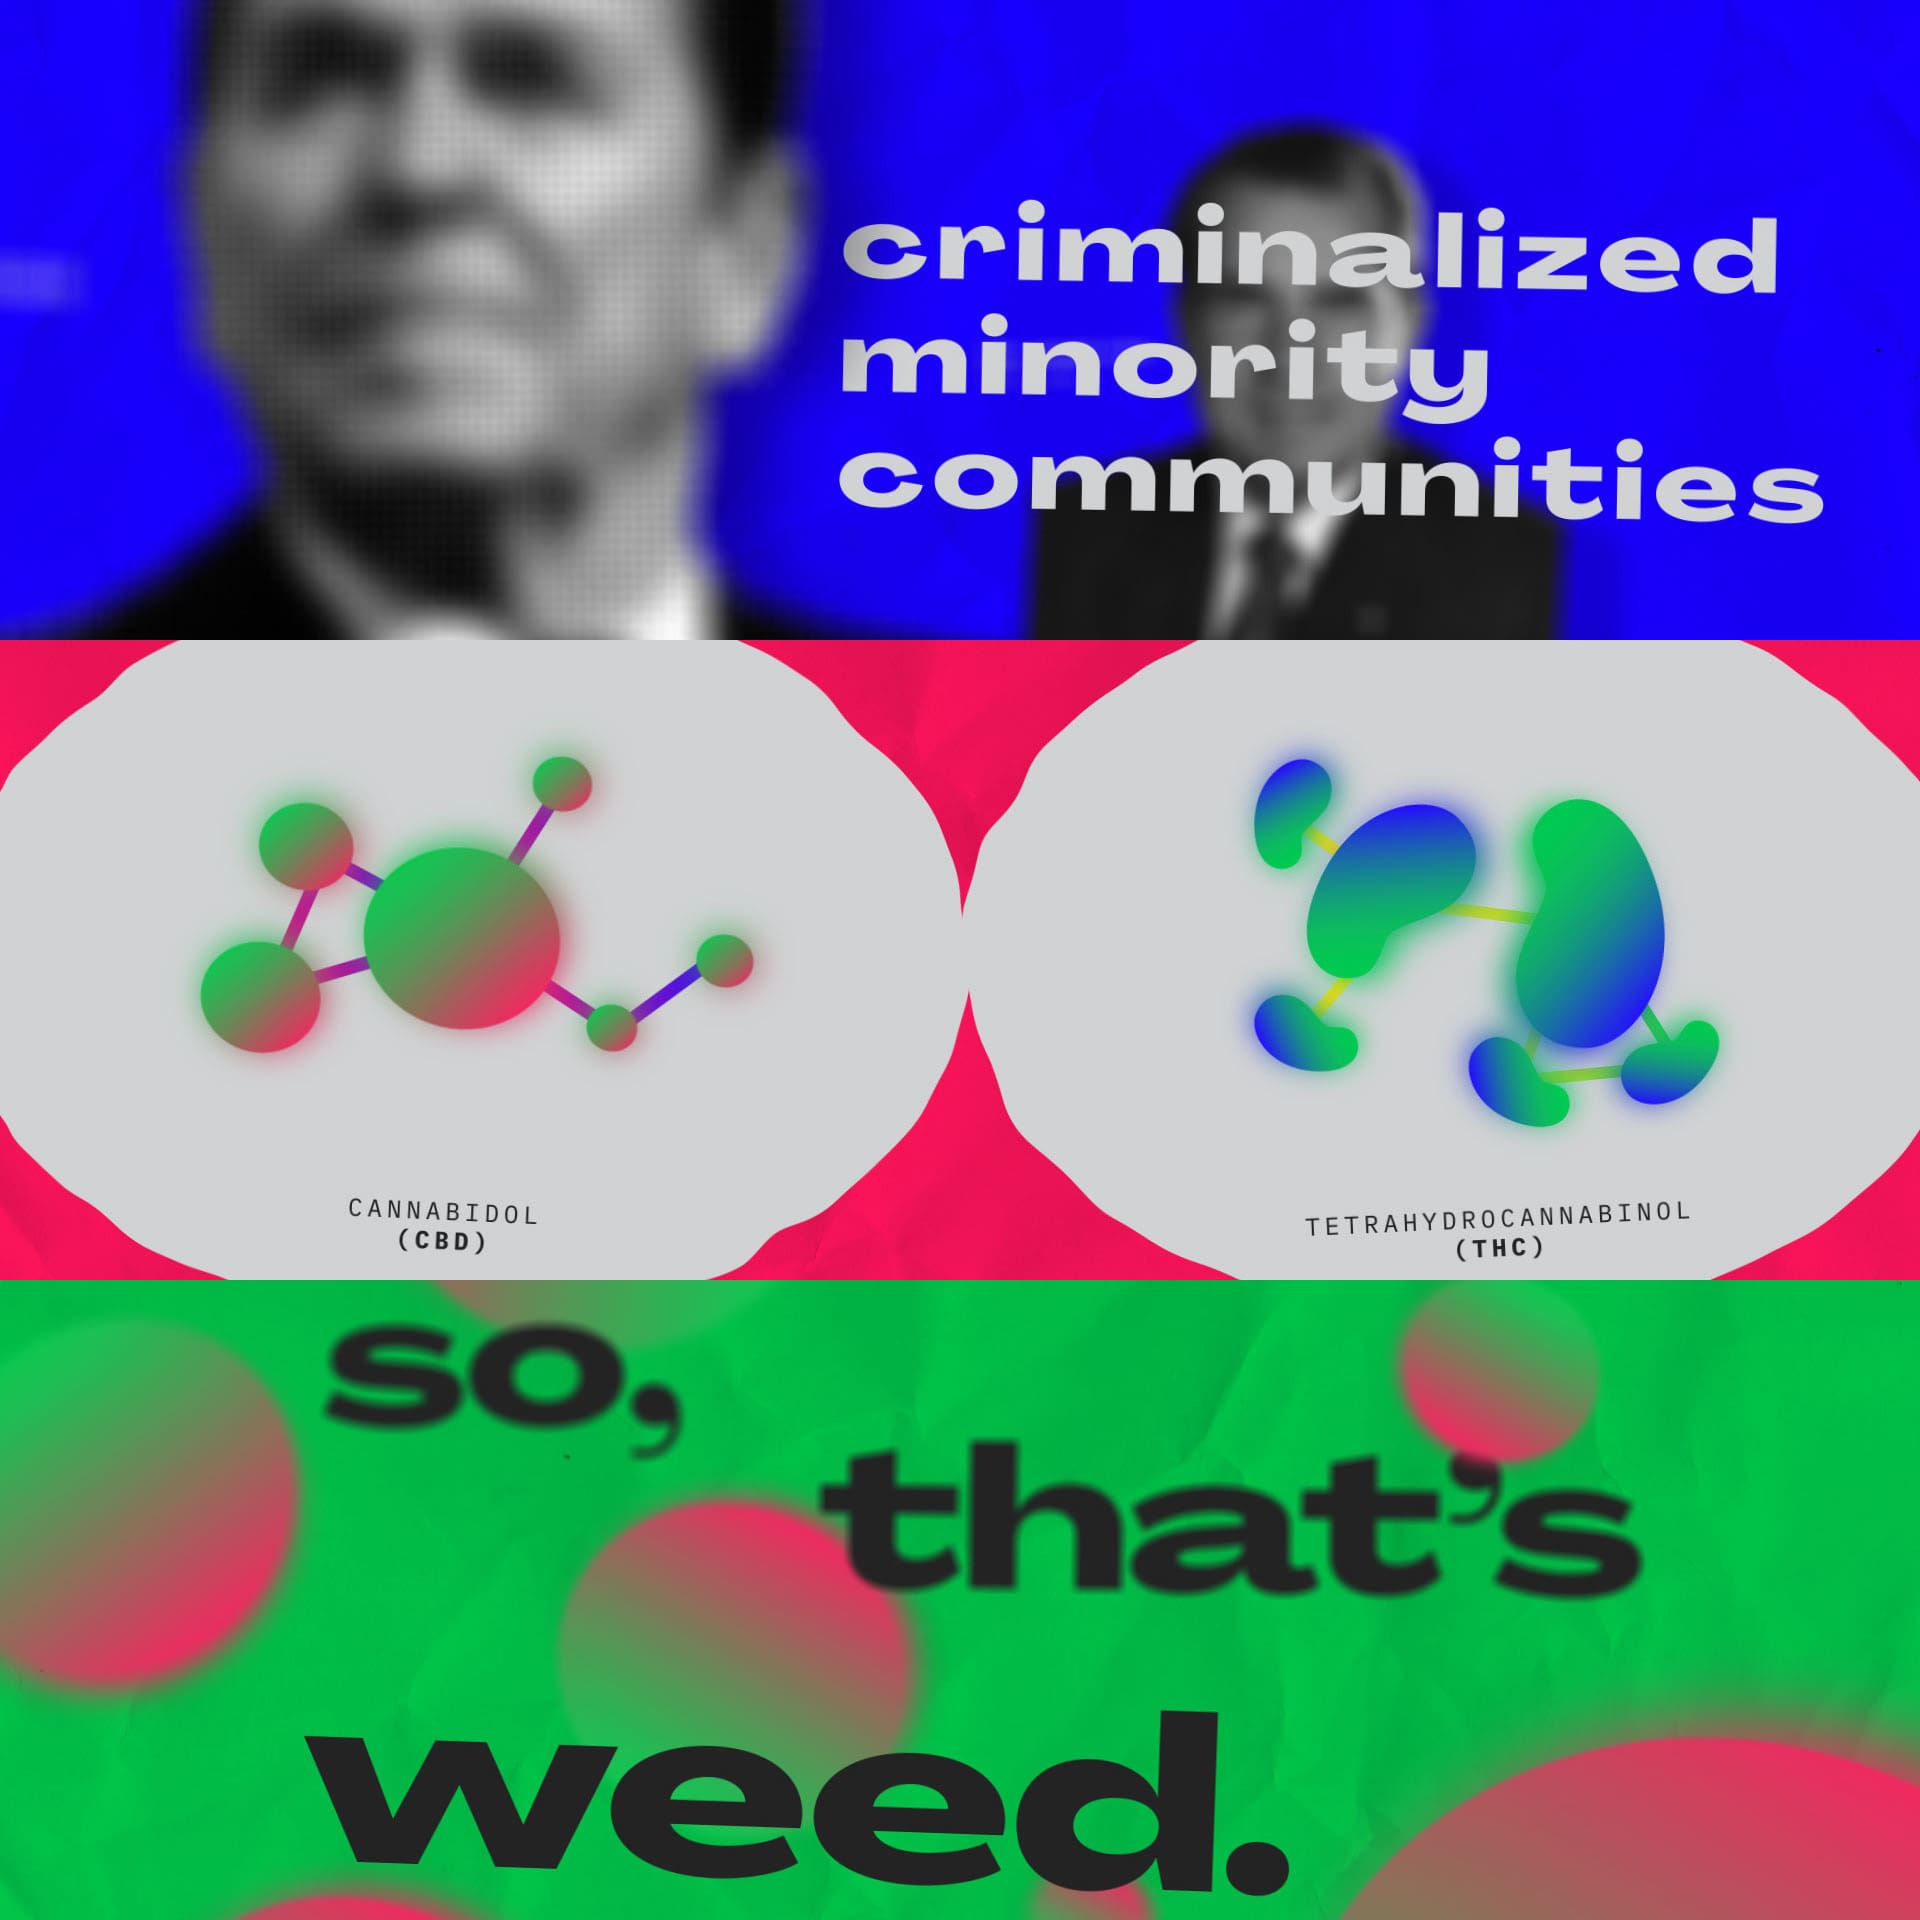 Poster about marijuana usage. The bottom panel is a green background with red and green gradient circles surrounding black text that reads "so, that's weed." The center shows two molecules comprised of red and green or blue gradient shapes with their respective names. The top panel is a blue background with two blurry monochromatic photographs of politicians behind white text that says "criminalized minority communities".